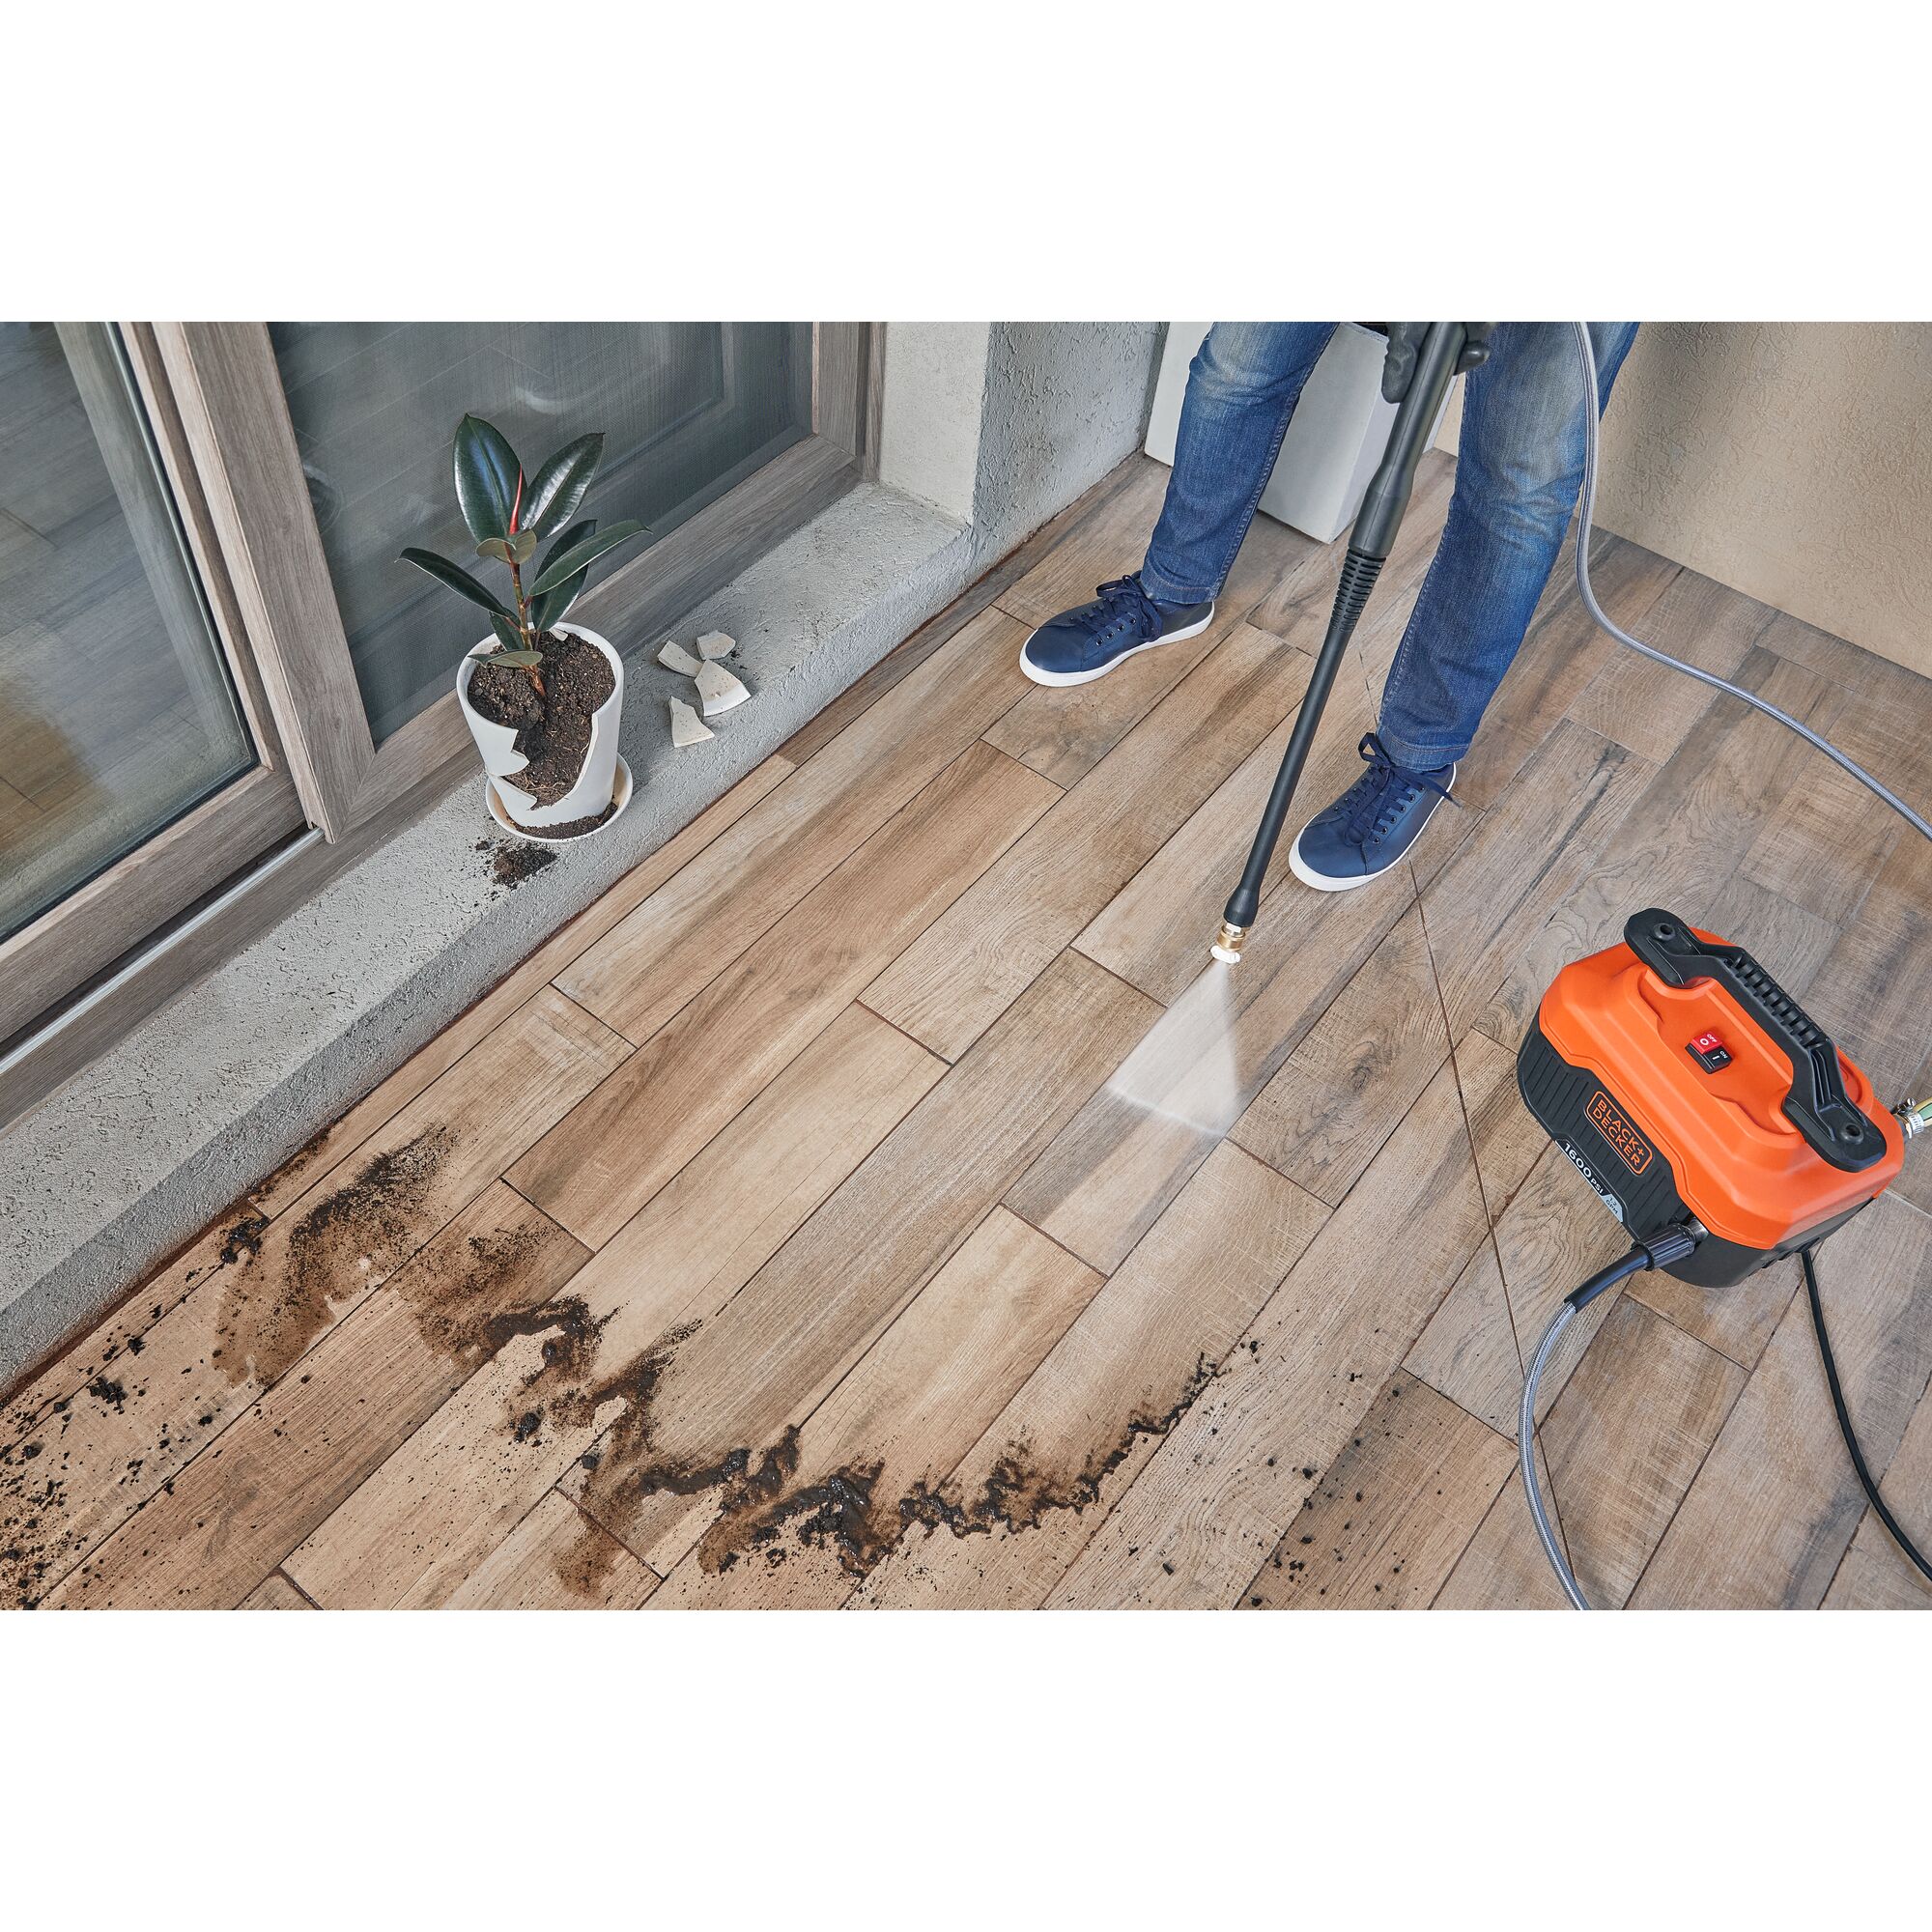 Person using Black and decker 1600-Psi 1.2-Gpm Pressure Washer to clean tile floors